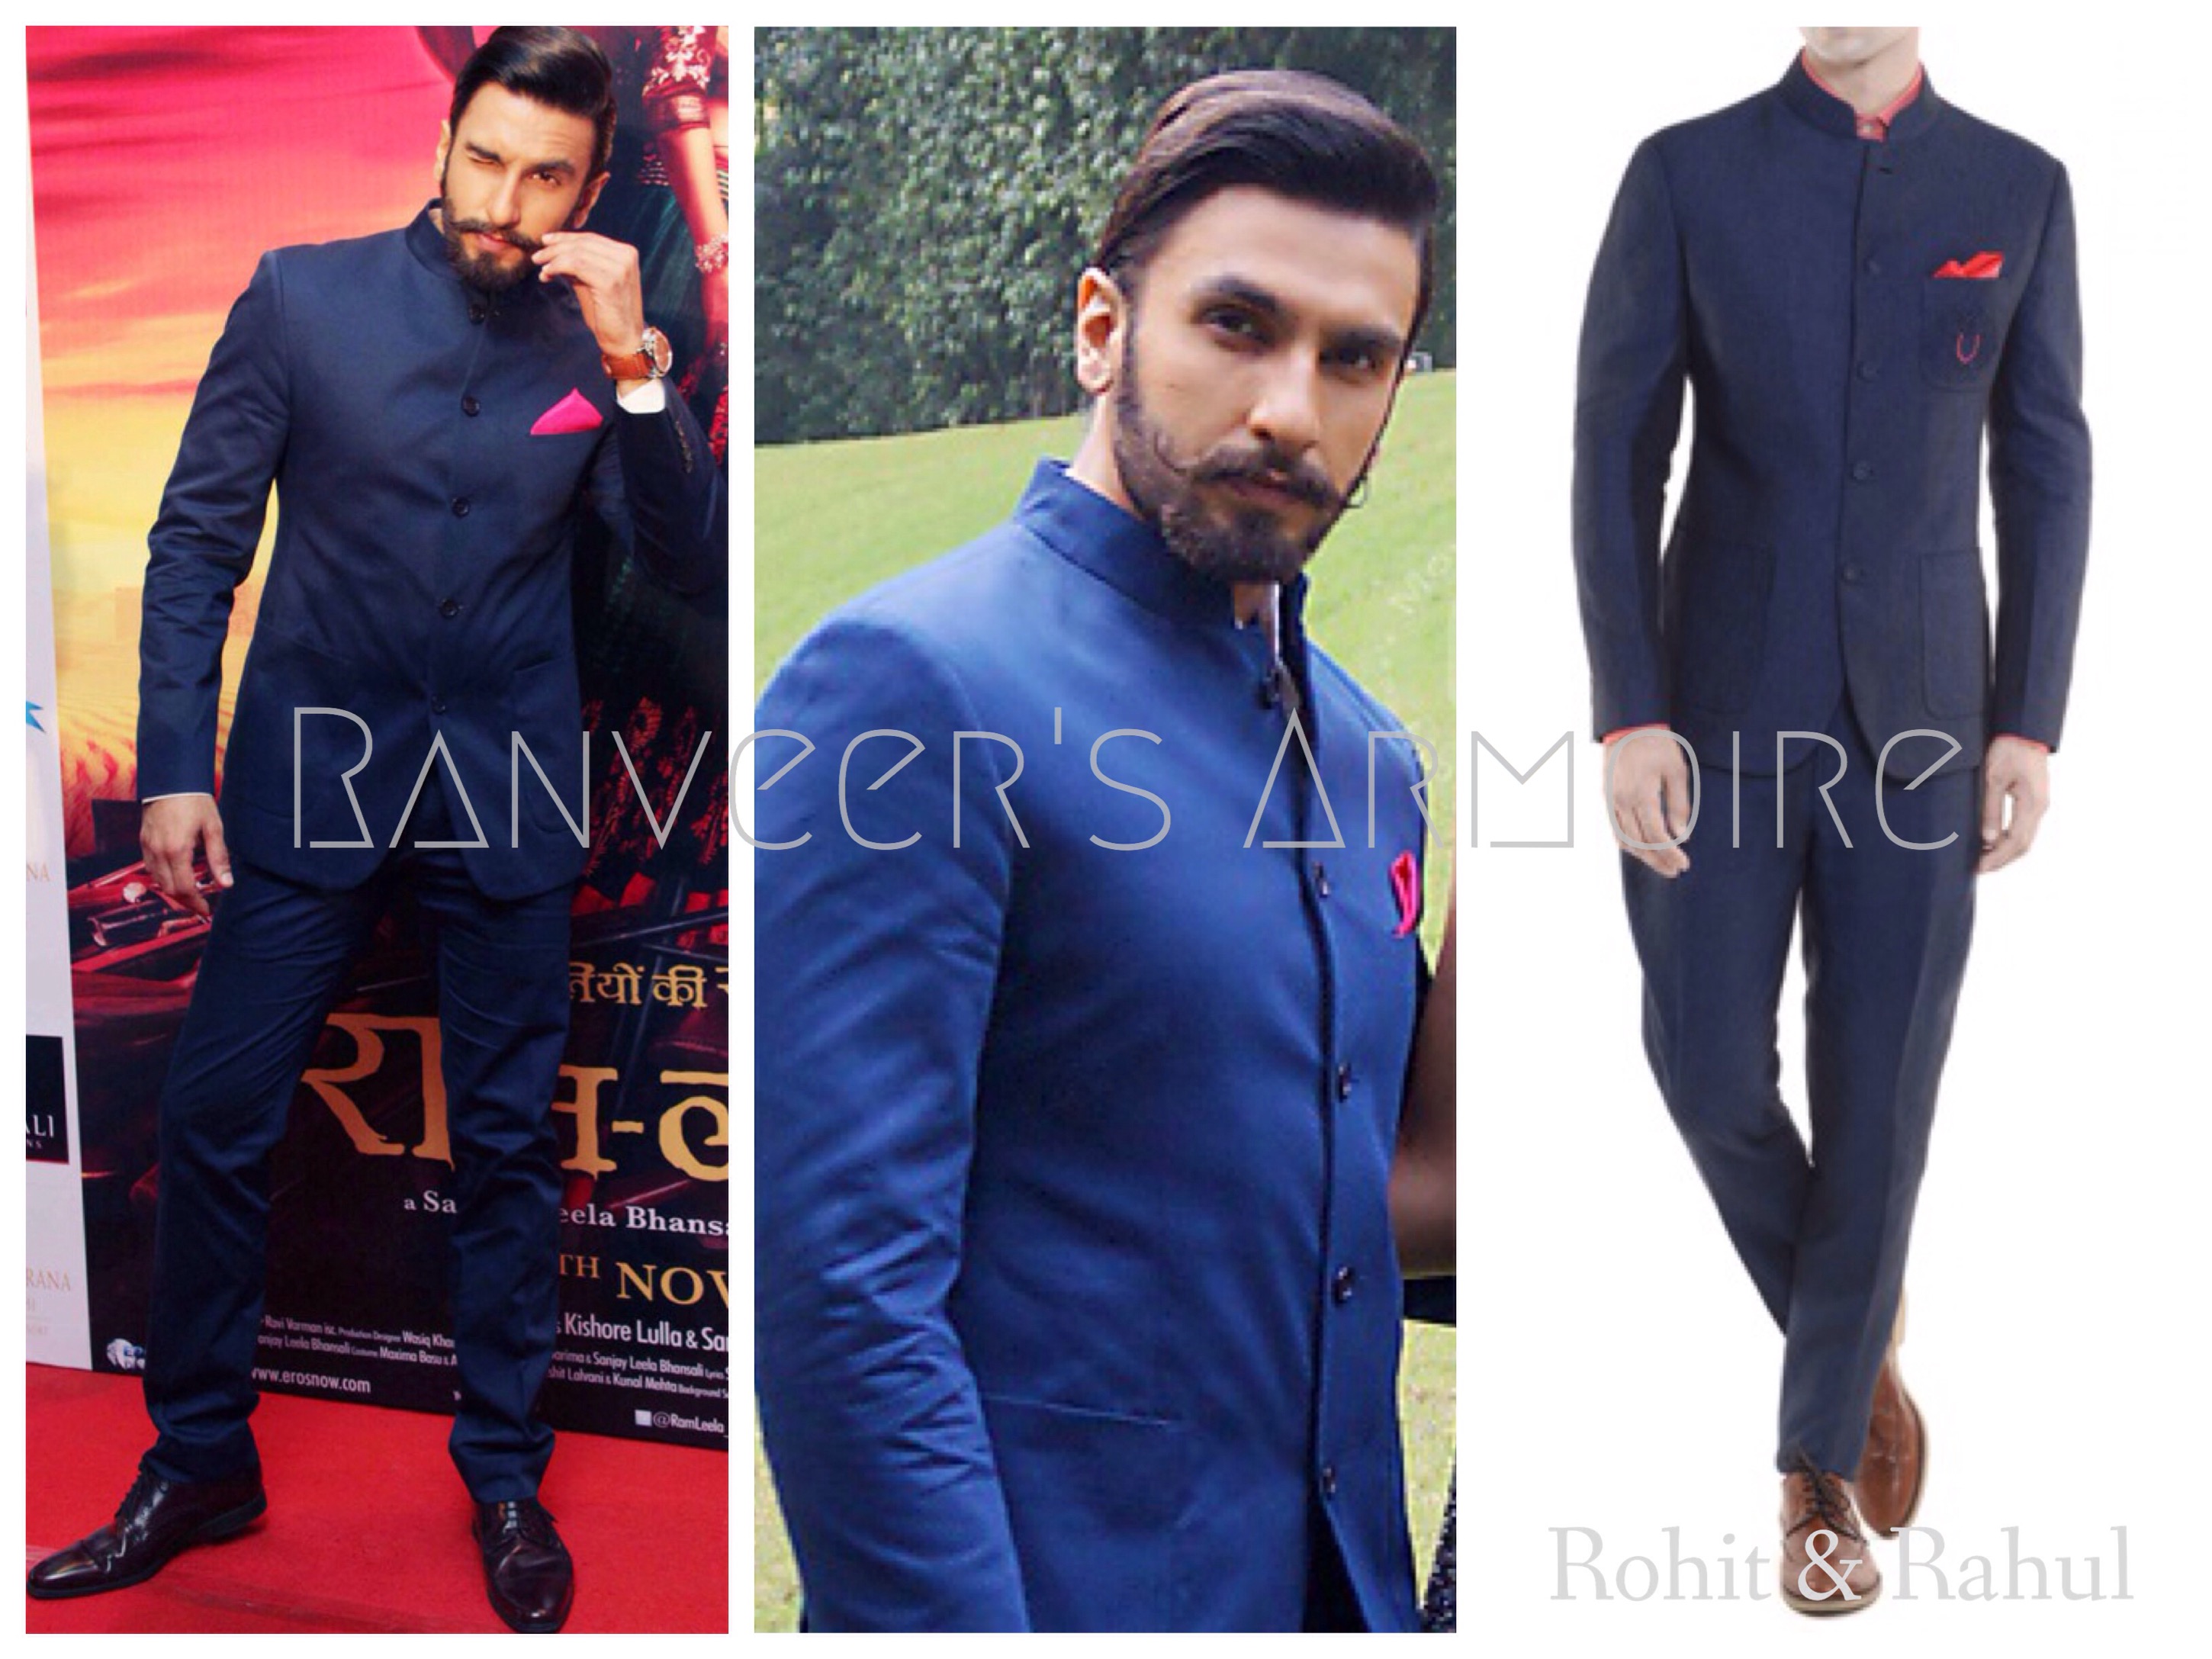 Ranveer Singh's Armoire  Style is an external expression of who